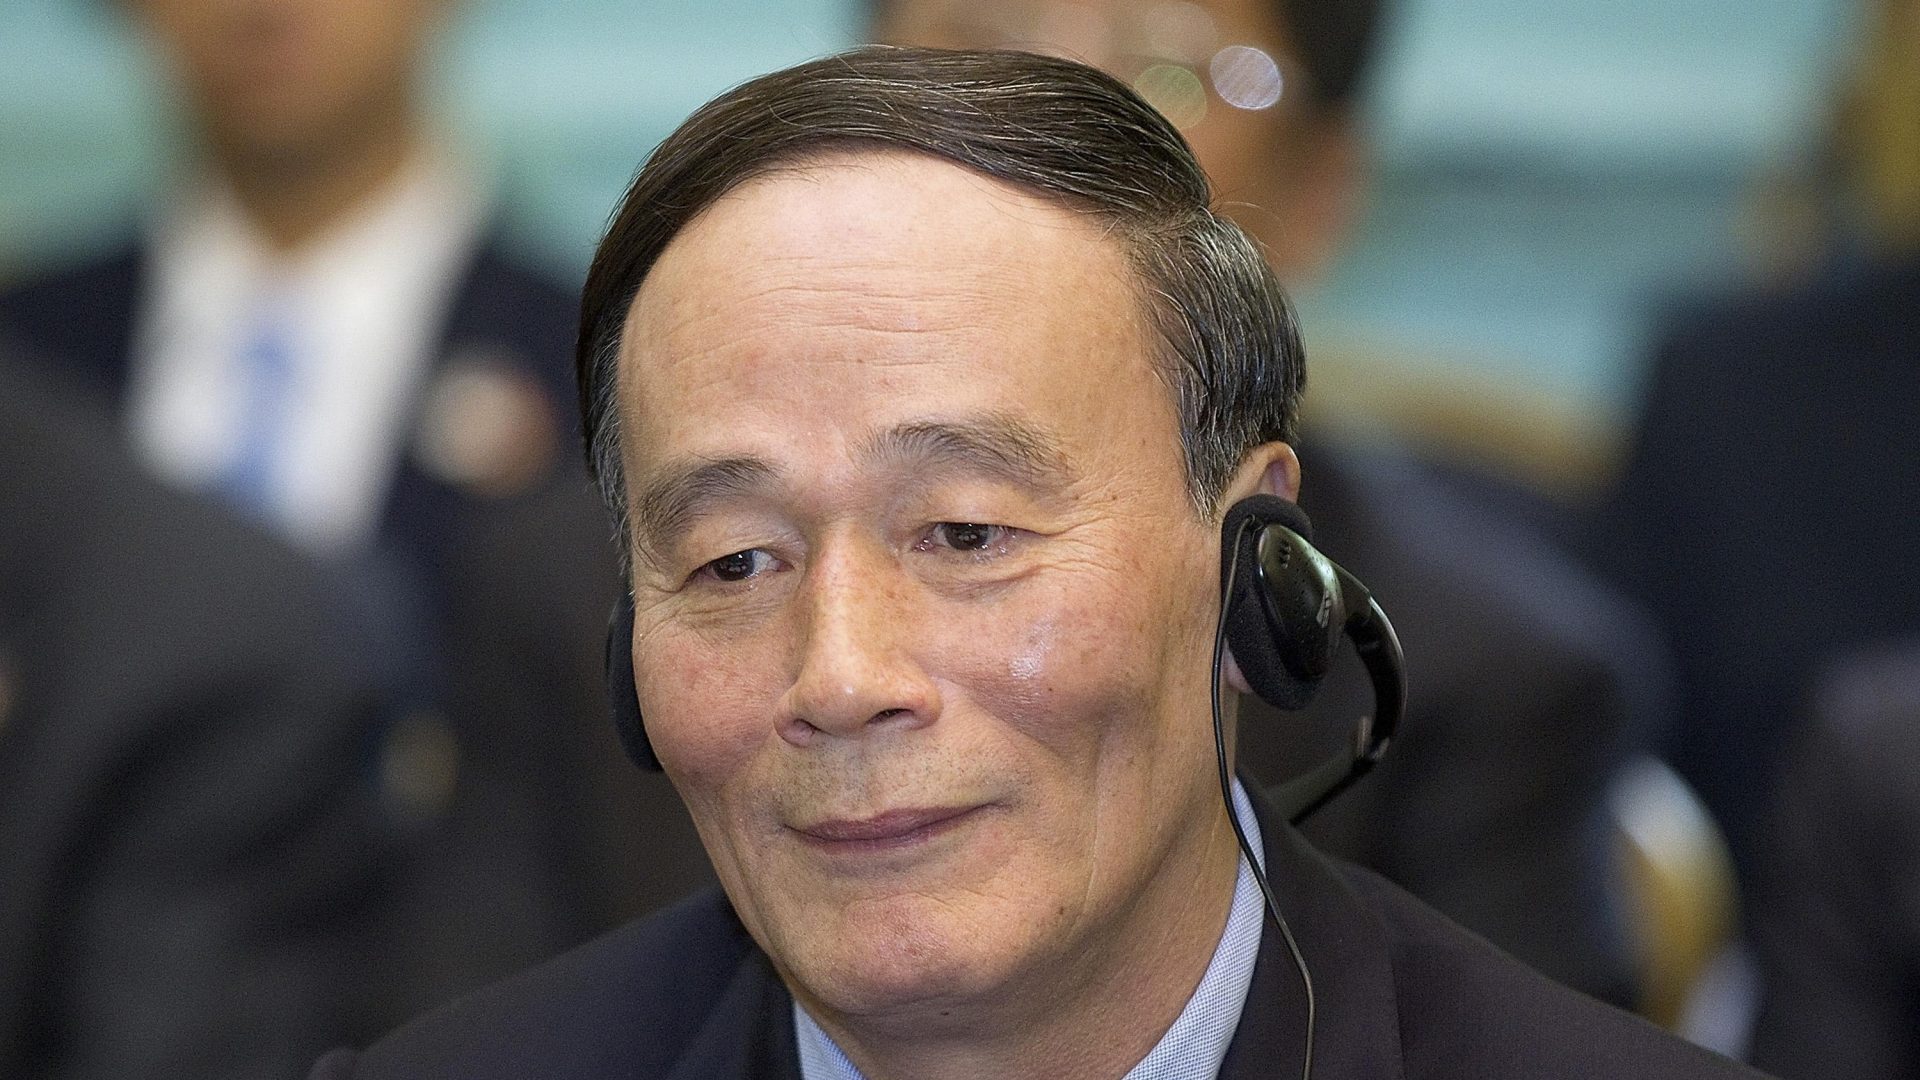 Wang Qishan during a UK-China Economic and Financial Dialogue at the Institute of Directors. Photo: Simon Dawson/PA Archive/PA Images